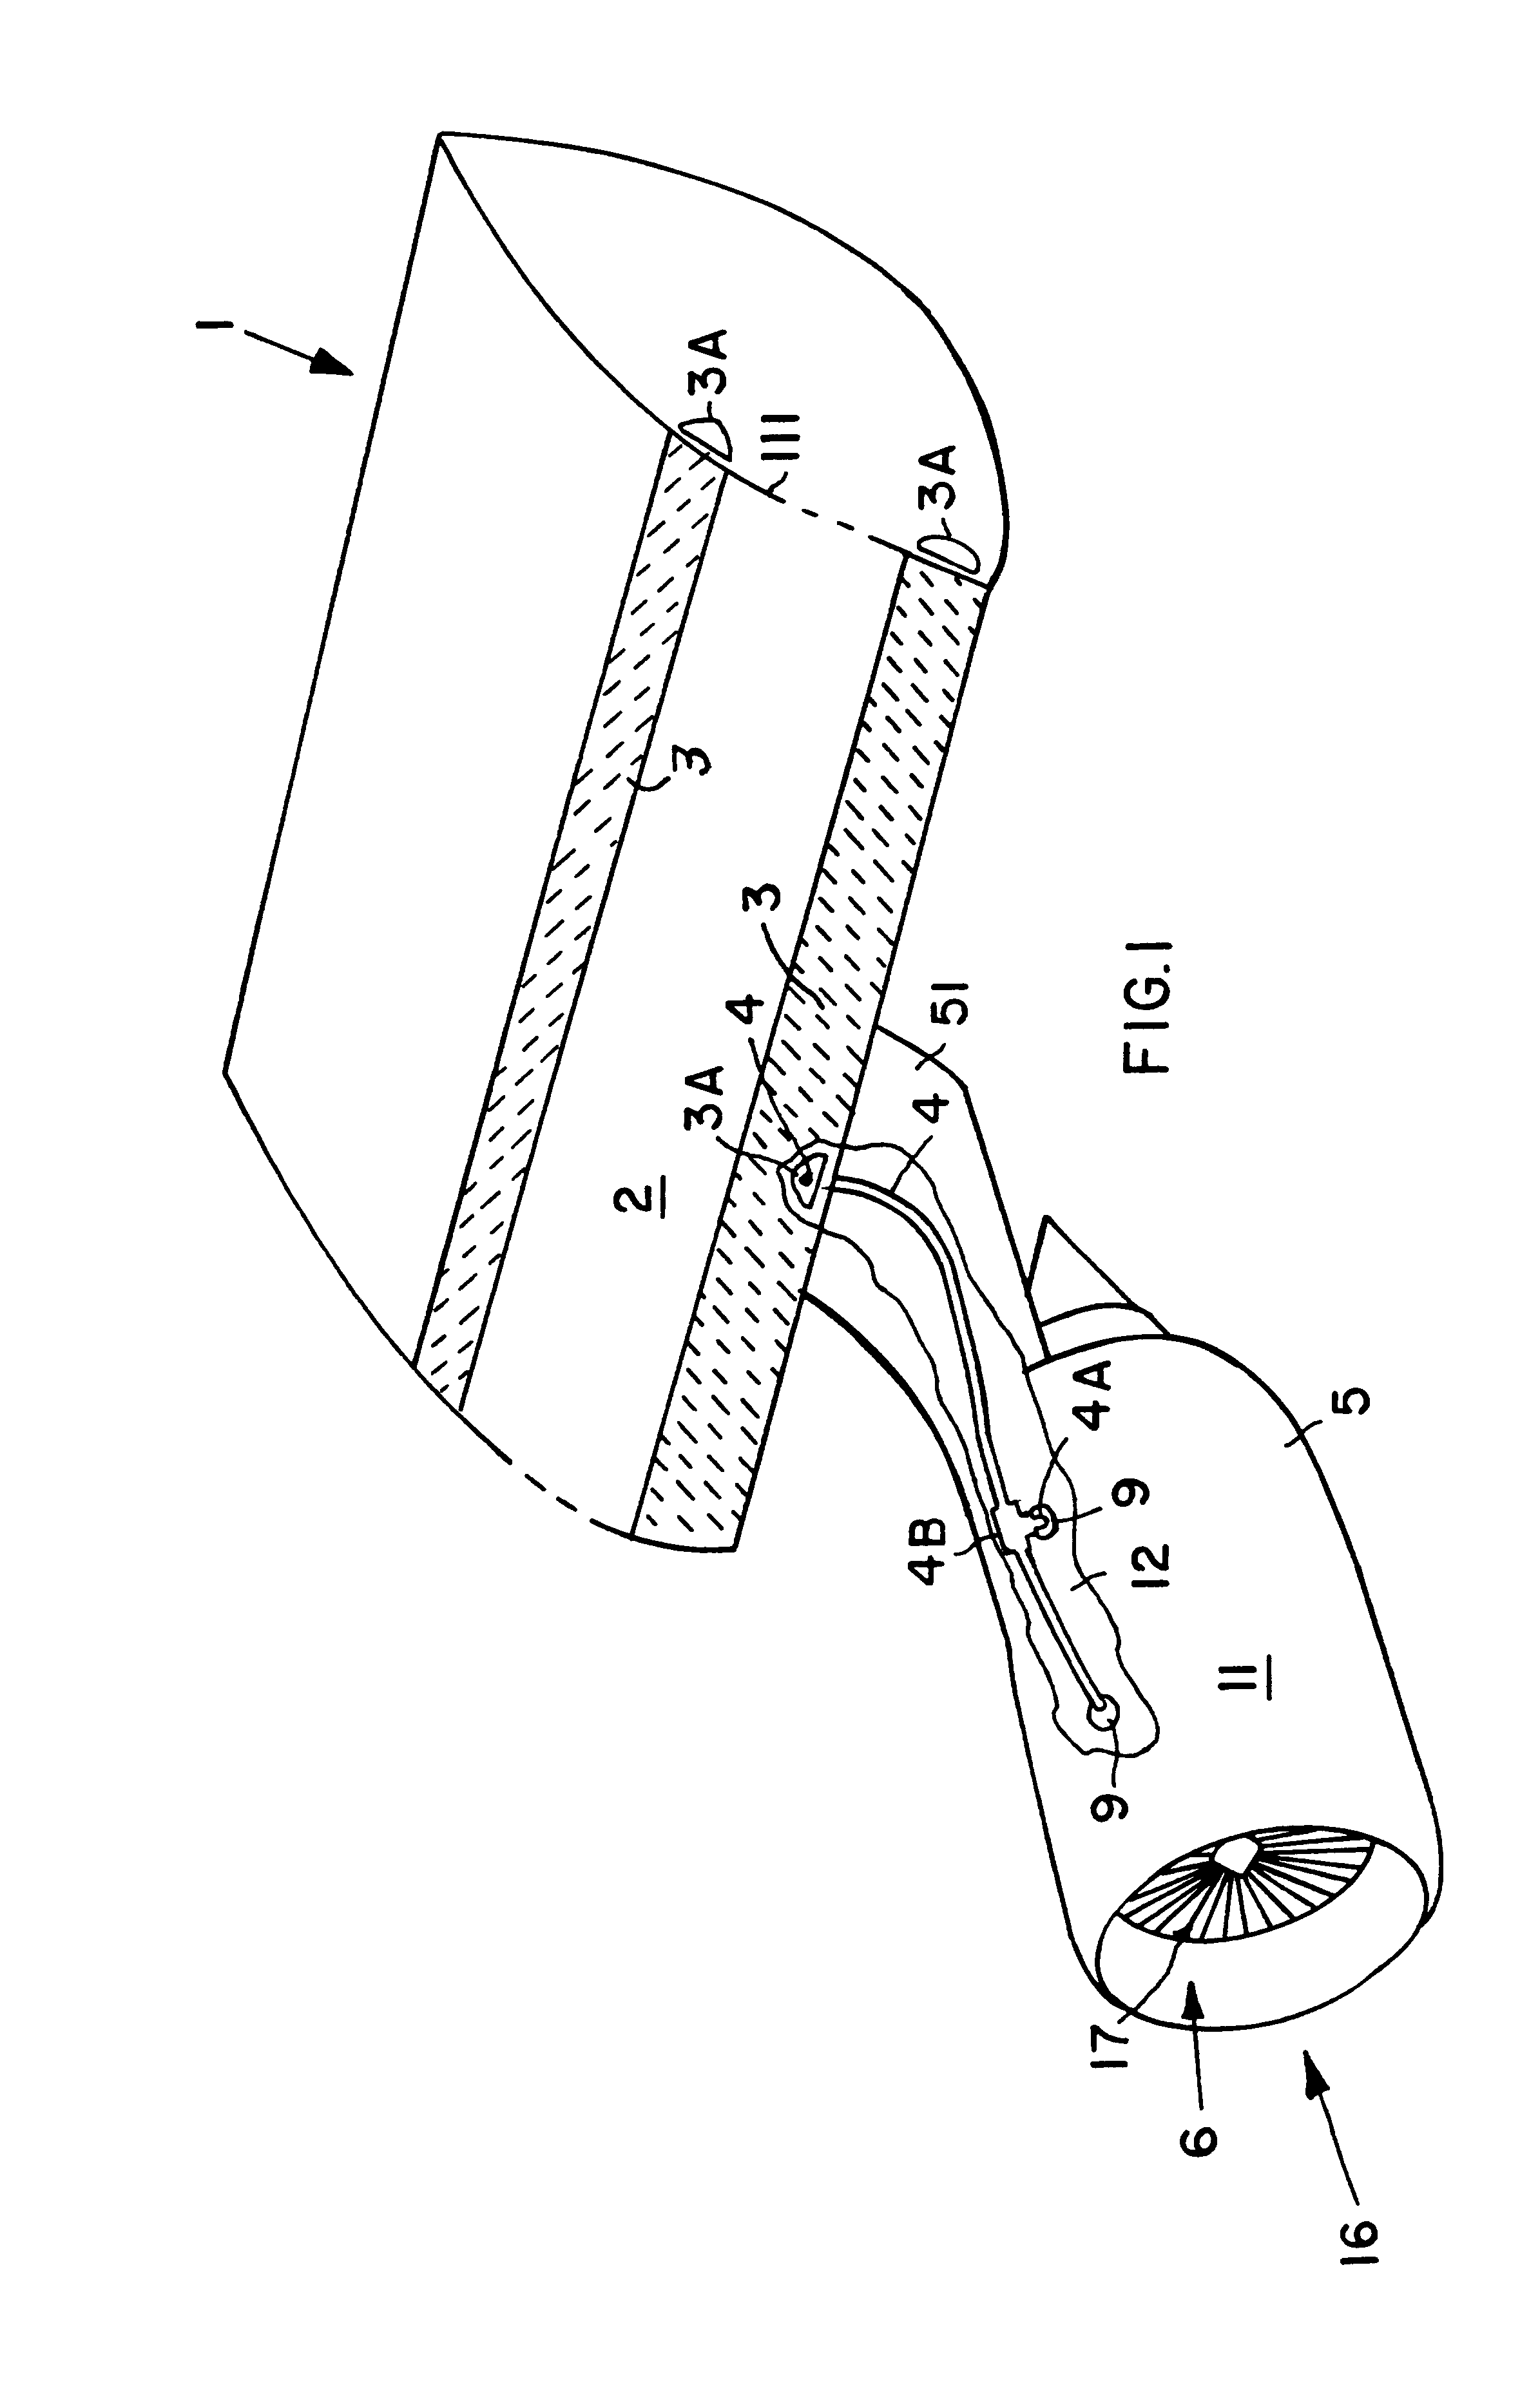 Suction device for boundary layer control in an aircraft